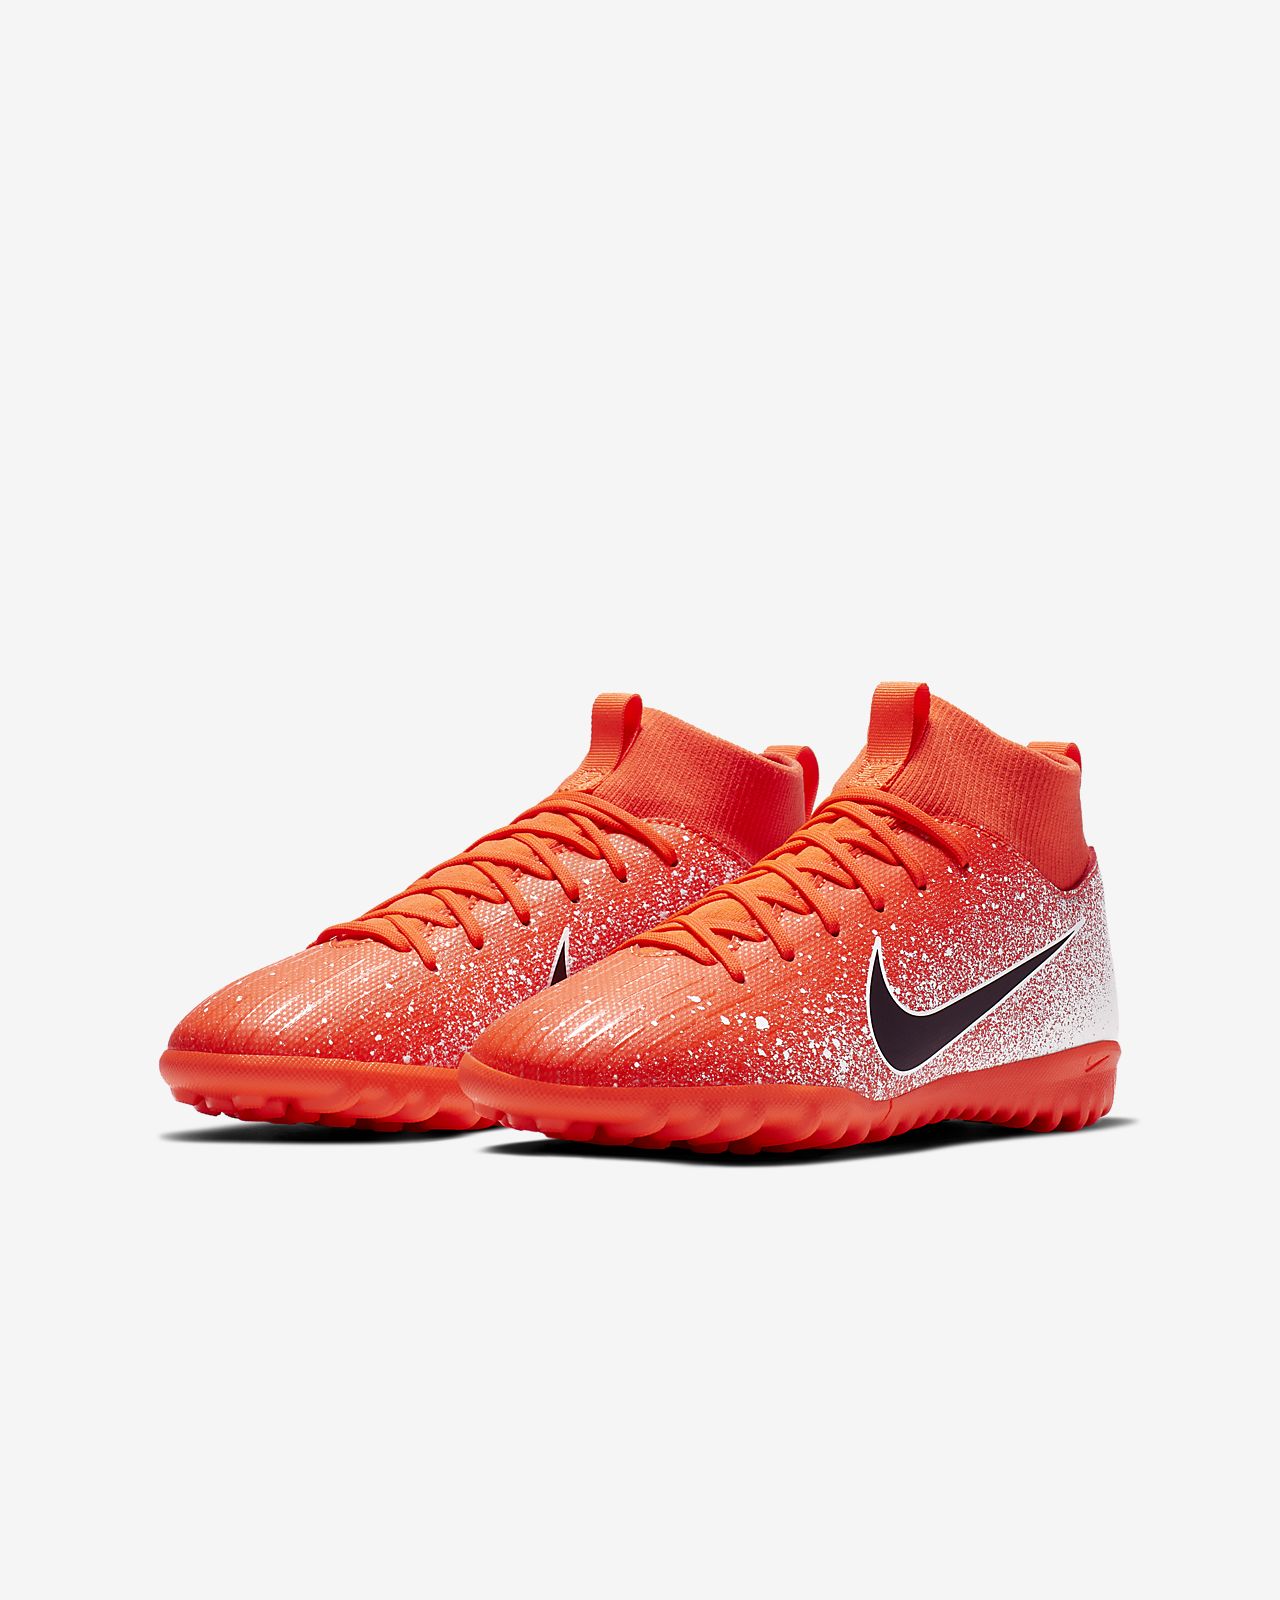 Nike Mercurial Superfly 6 Pro FG 'Just Do It Pack' UNBOXING